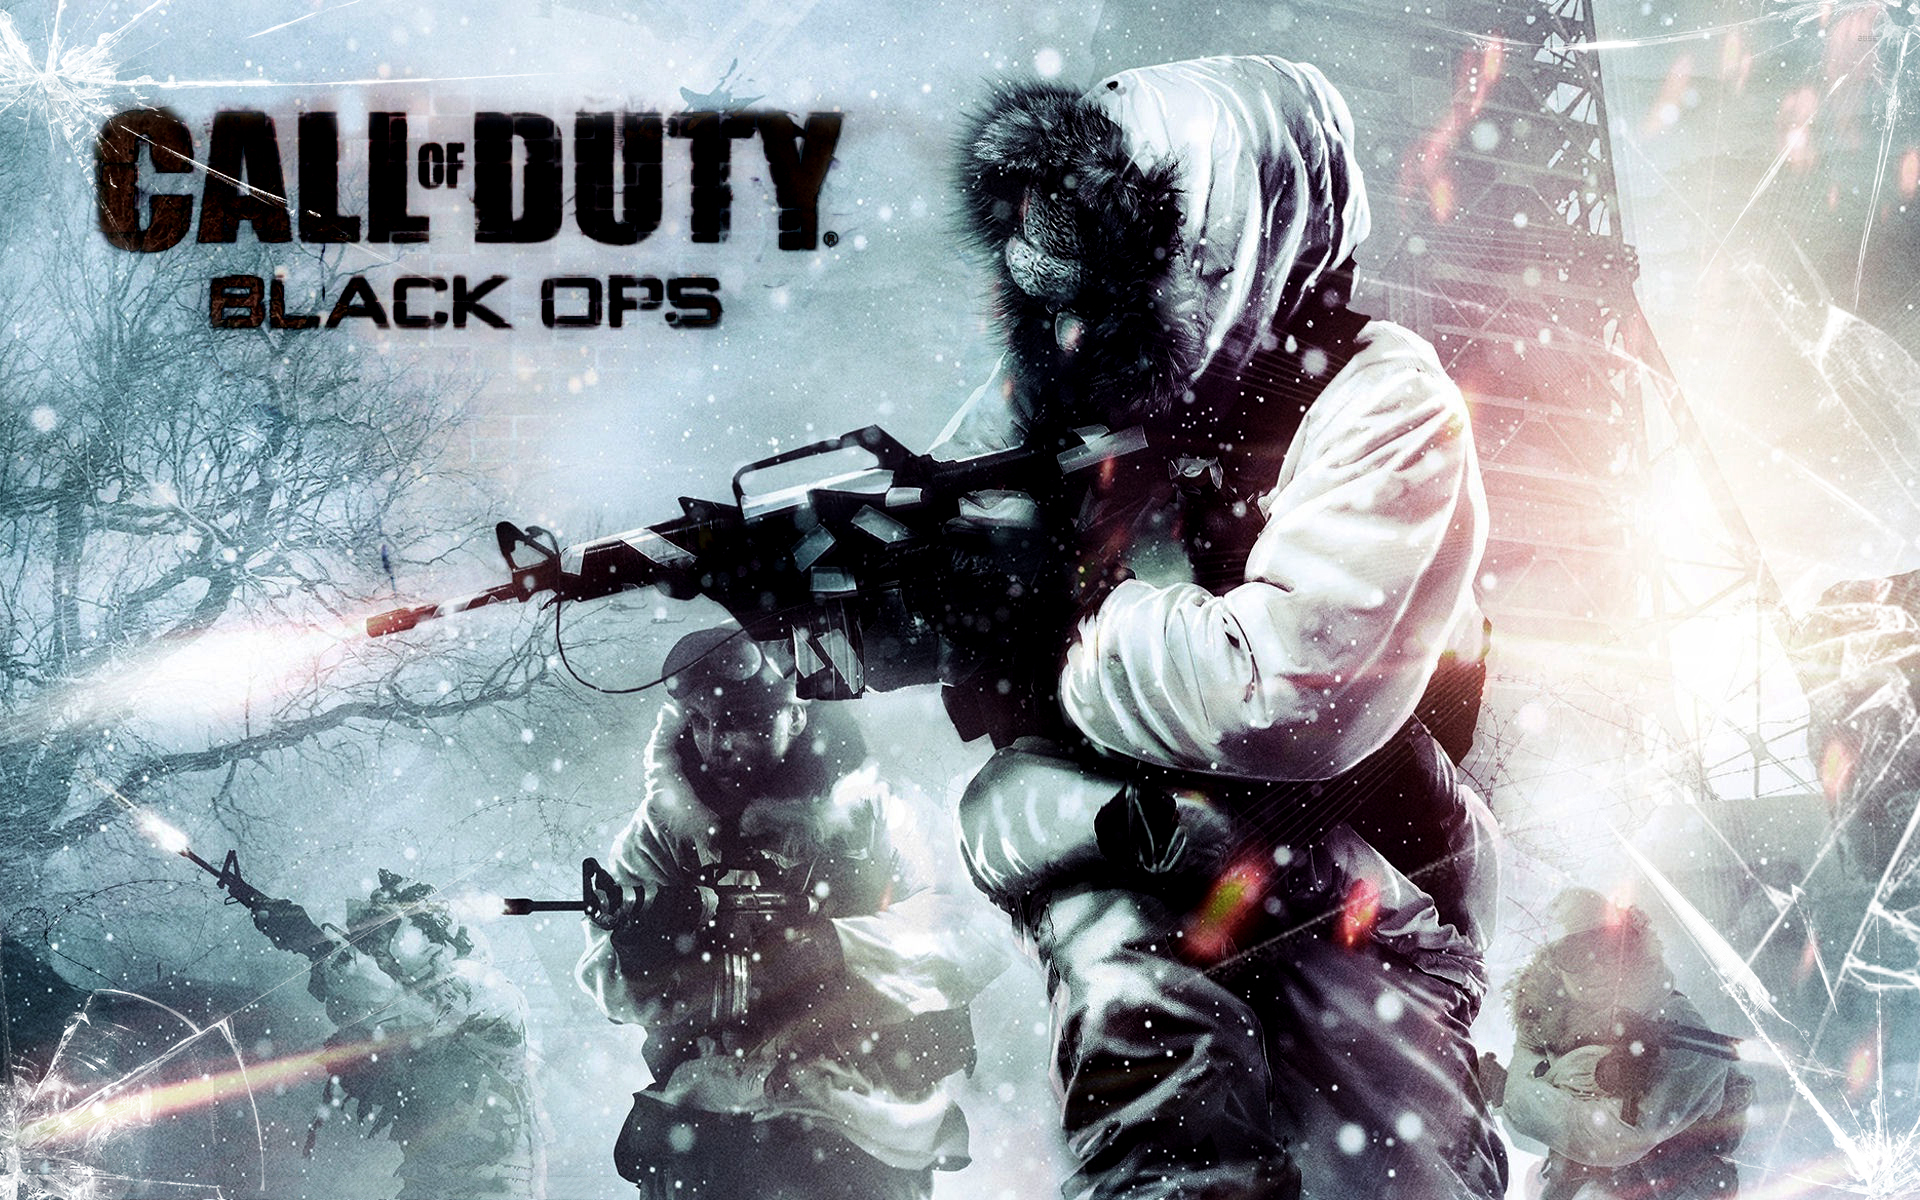 Download the Black Ops Snow Fight Wallpaper, Black Ops Snow Fight